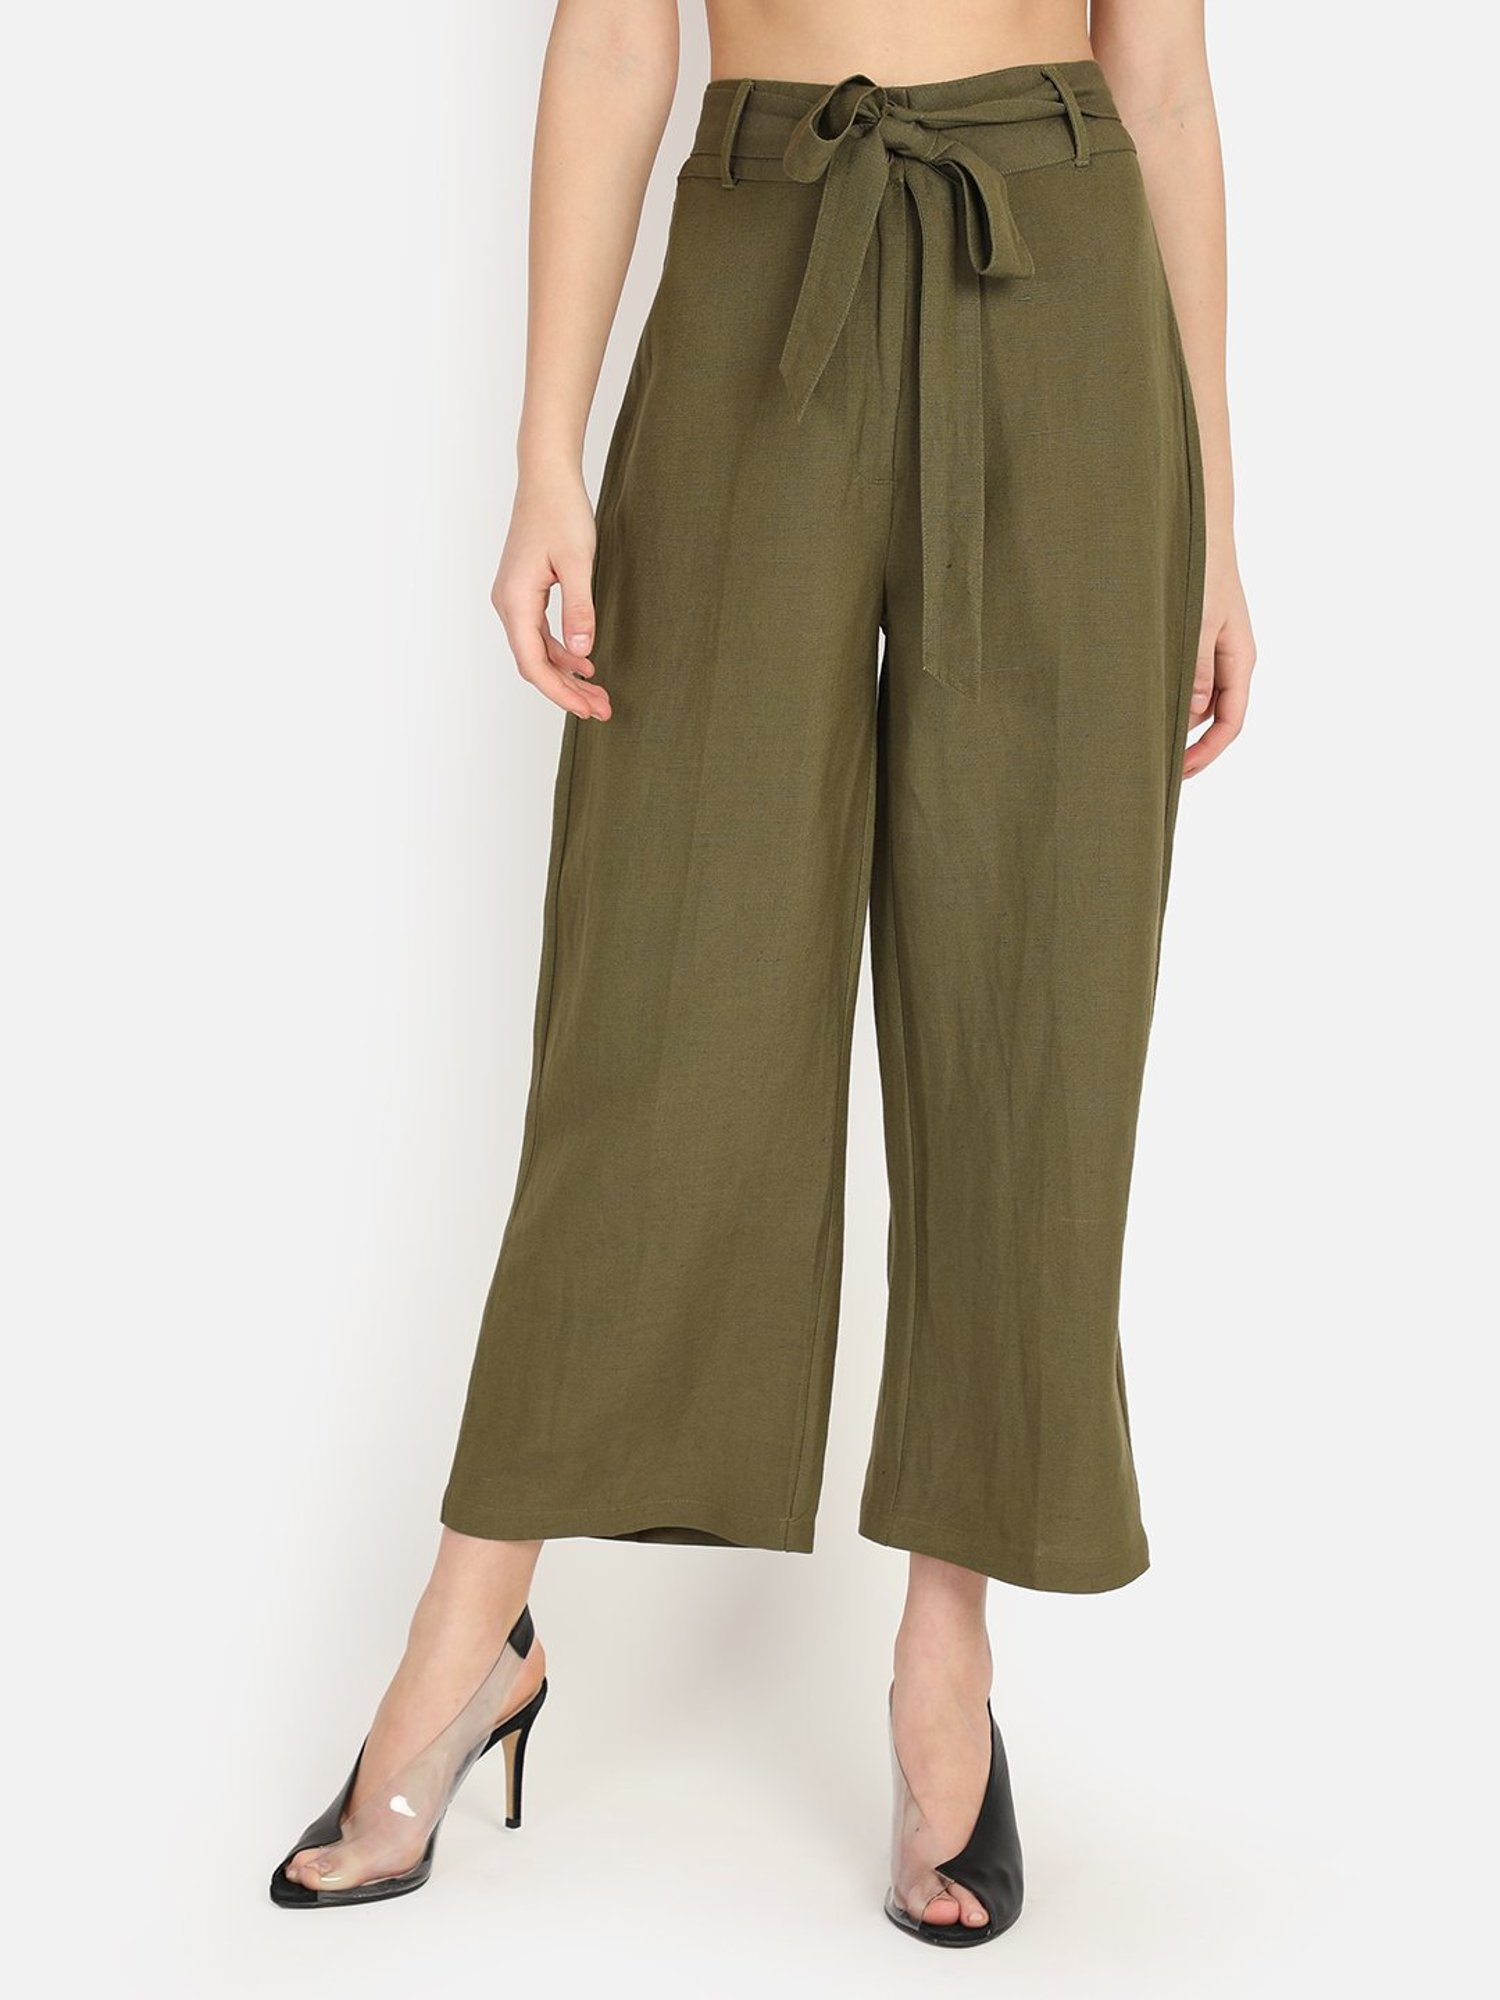 Buy COVER STORY Off White Solid Cotton Womens Trousers | Shoppers Stop